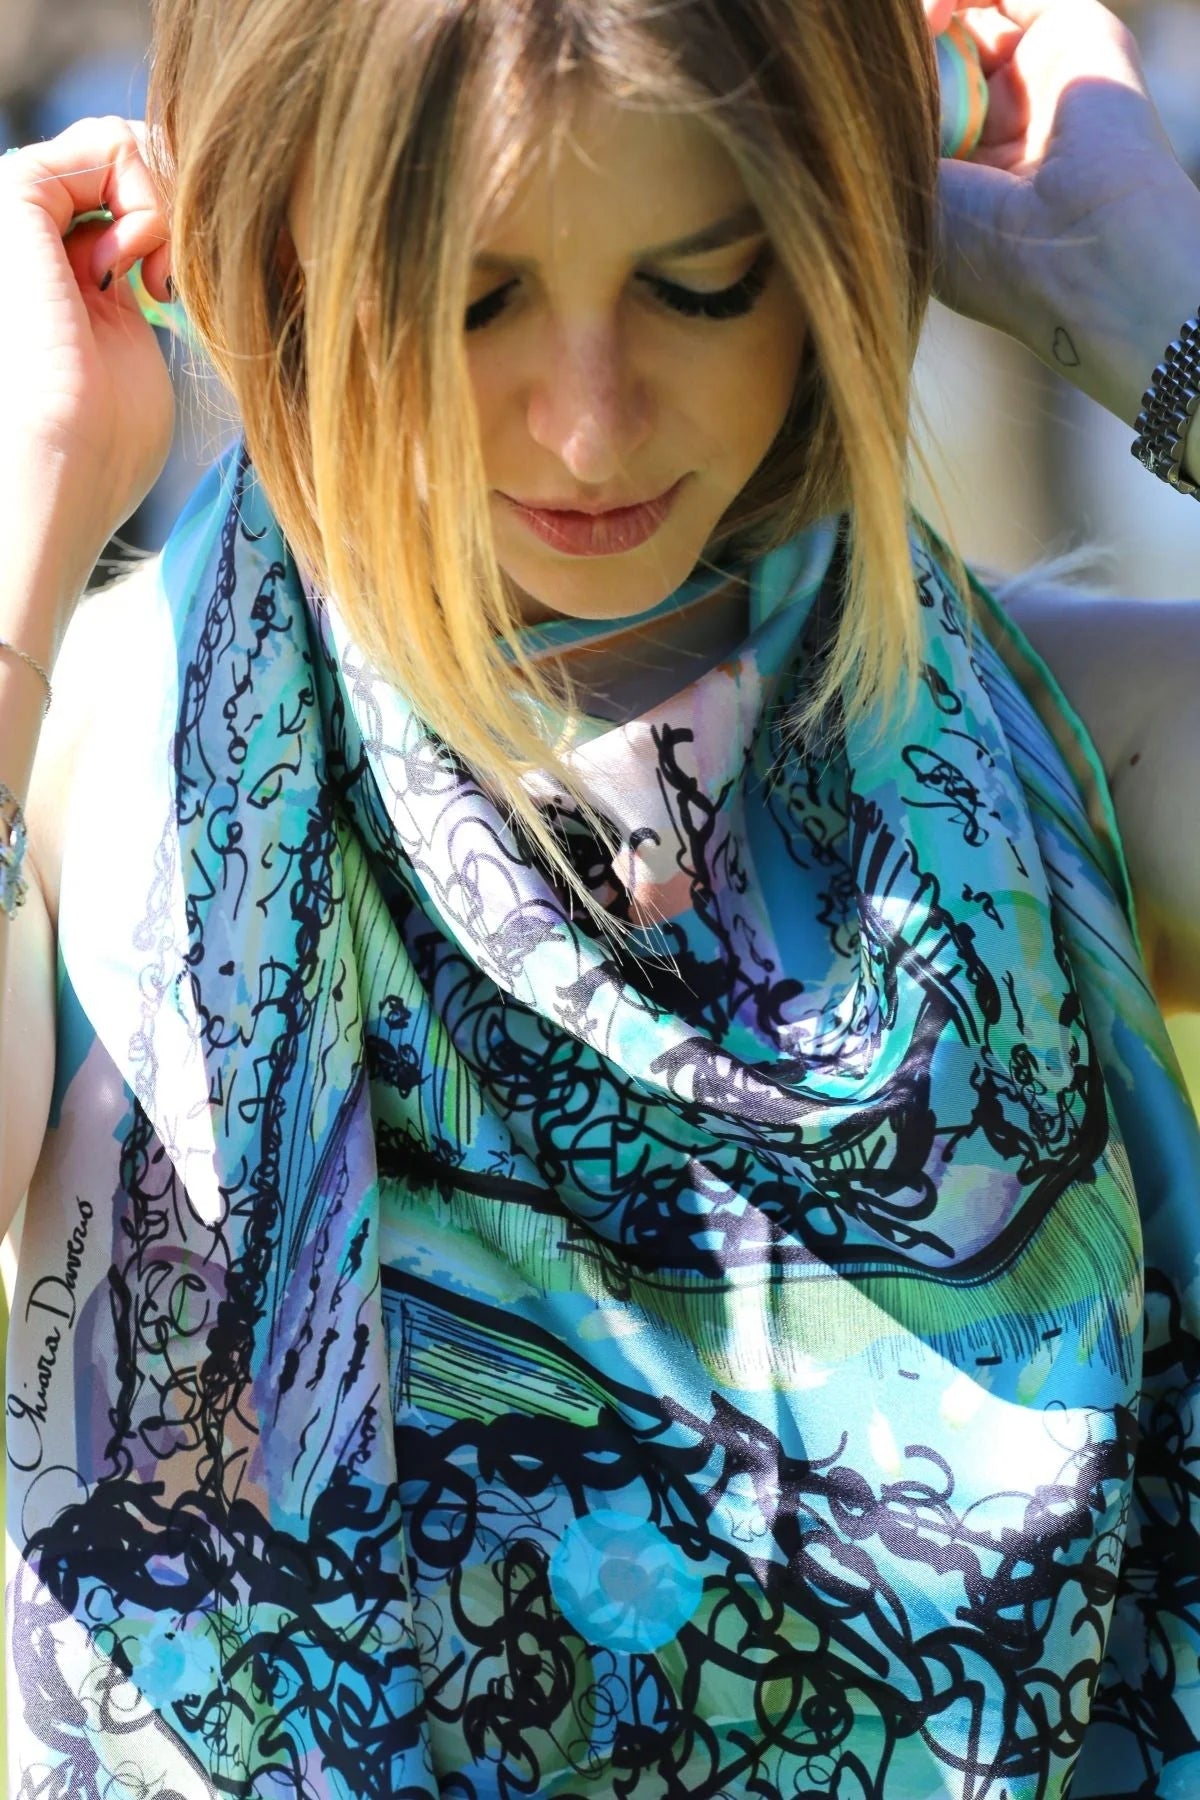 RENDEZ-VOUS IN TUSCANY - 90x90 Silk Twill Scarf